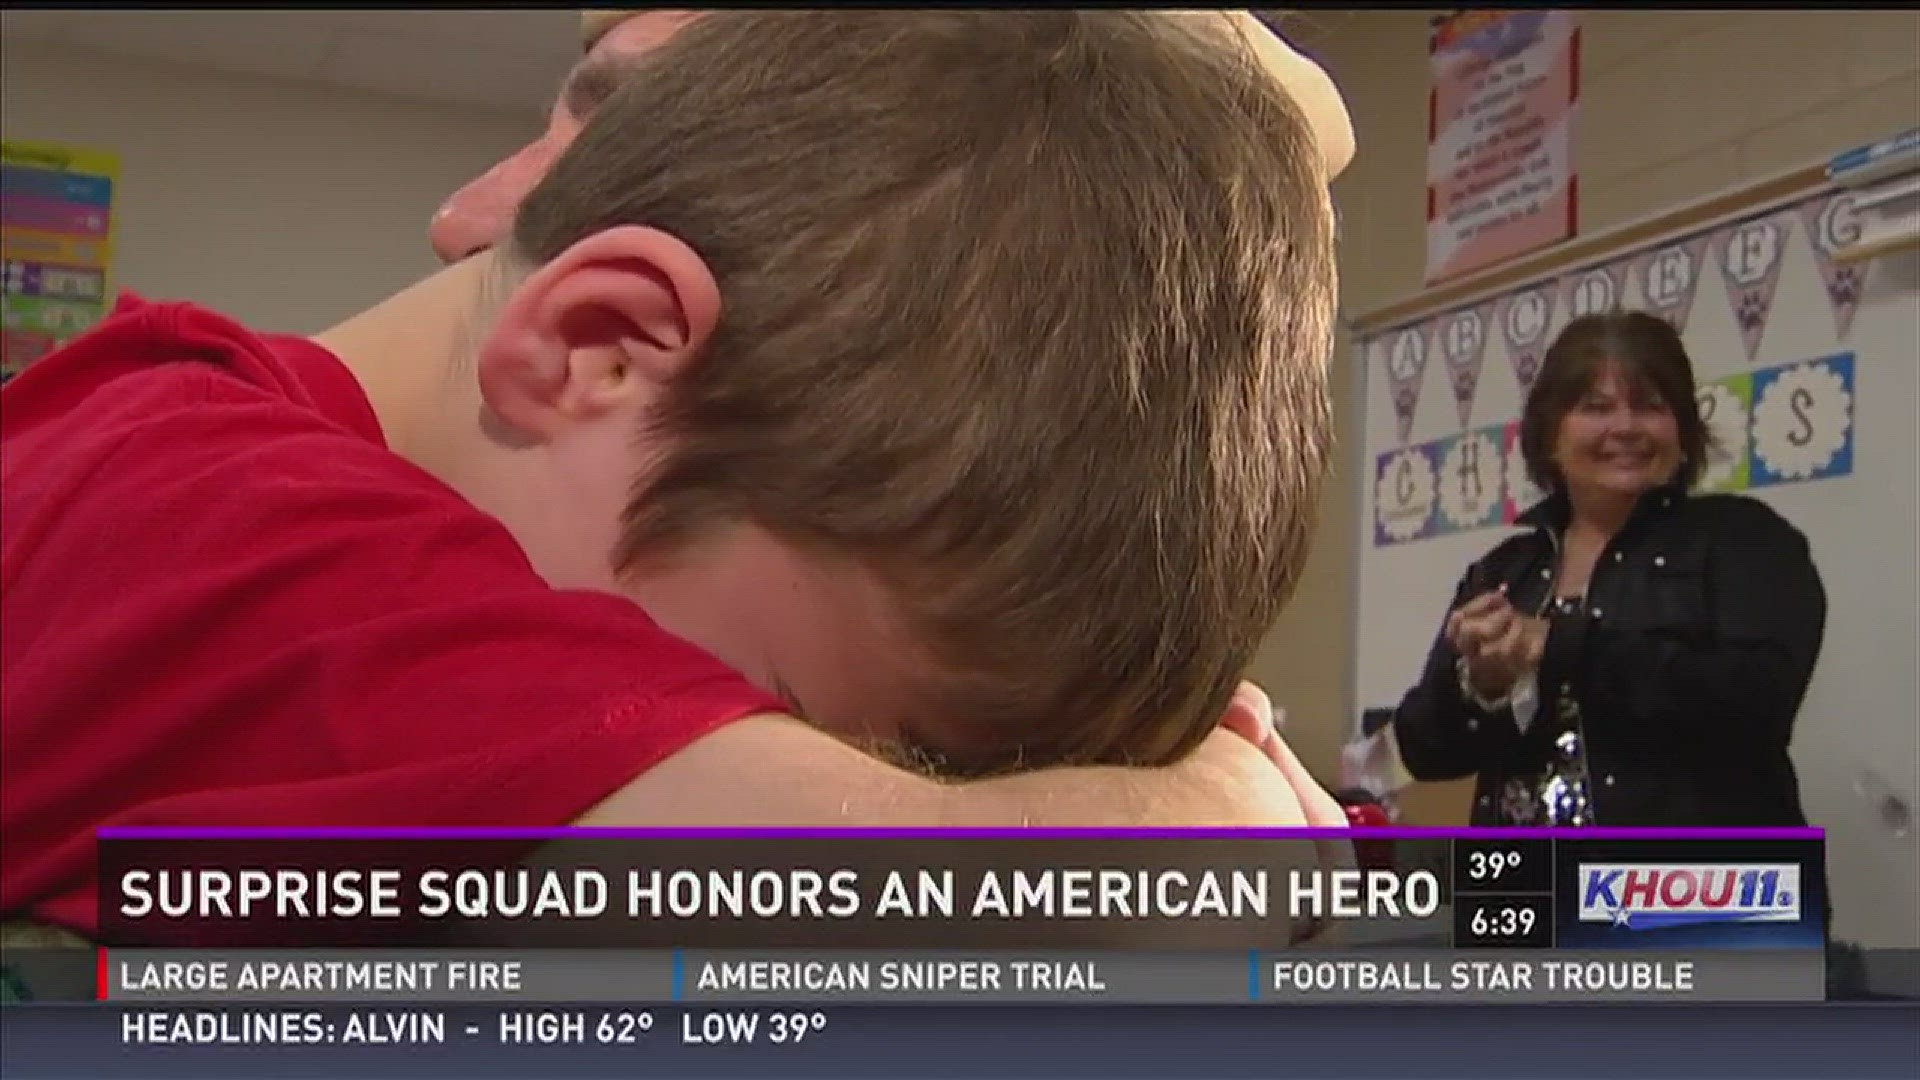 Watch as a Houston serviceman is reunited with his son